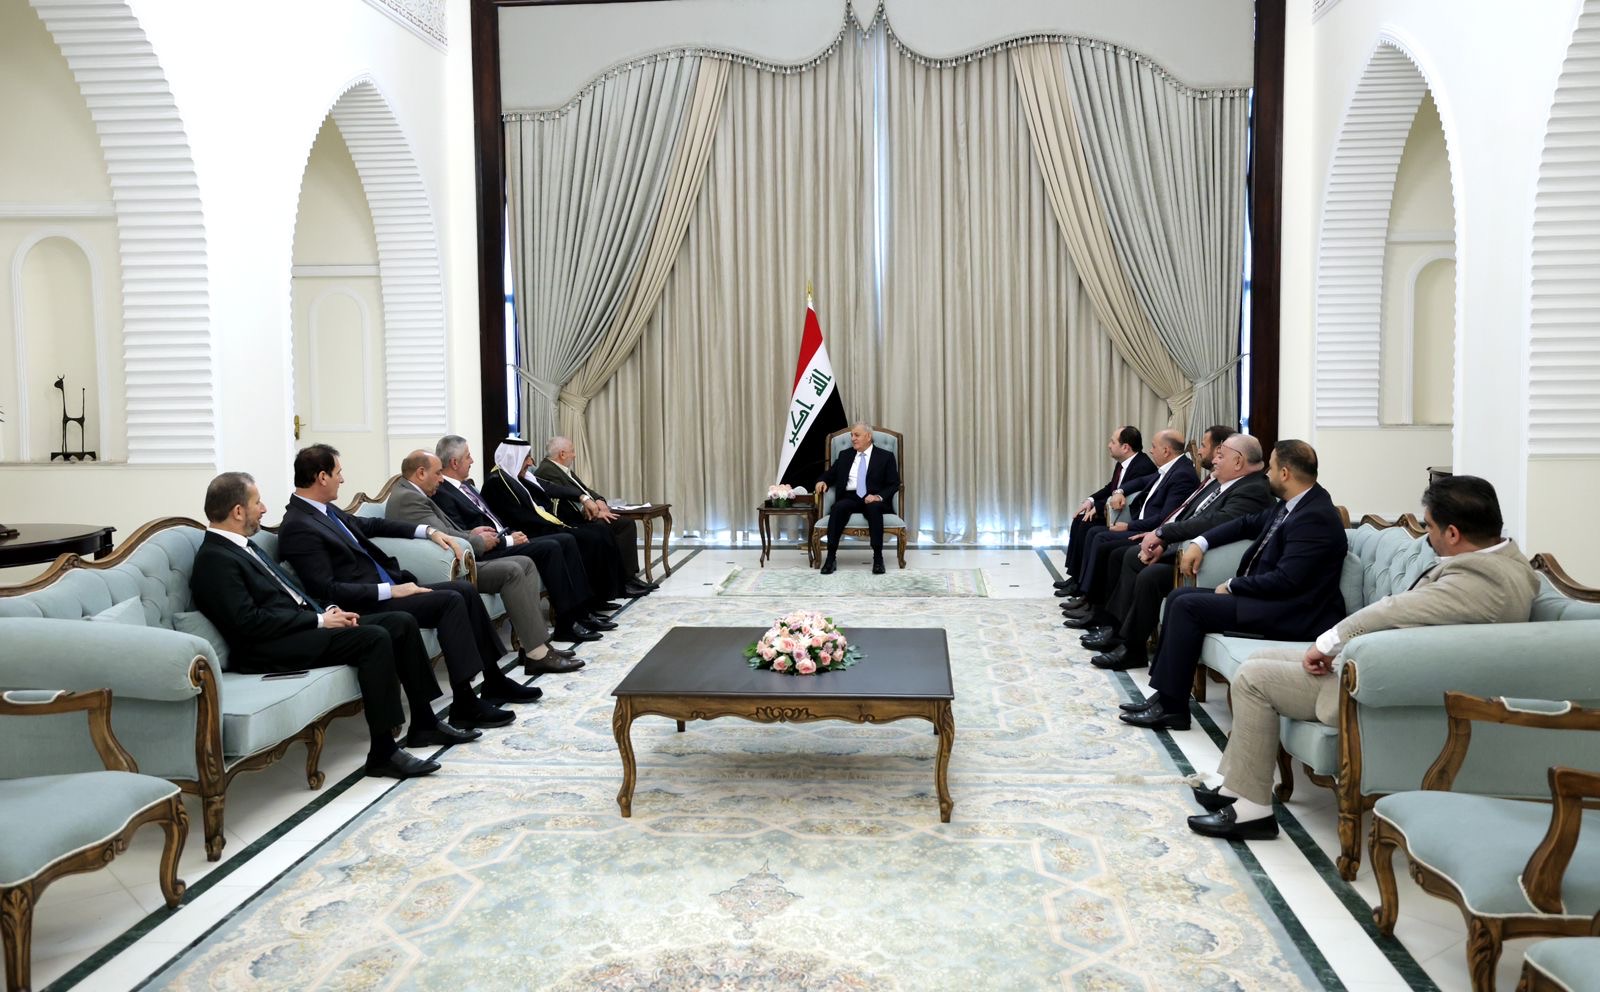 Iraq's President: Baghdad-Erbil disputes must be resolved according to constitution